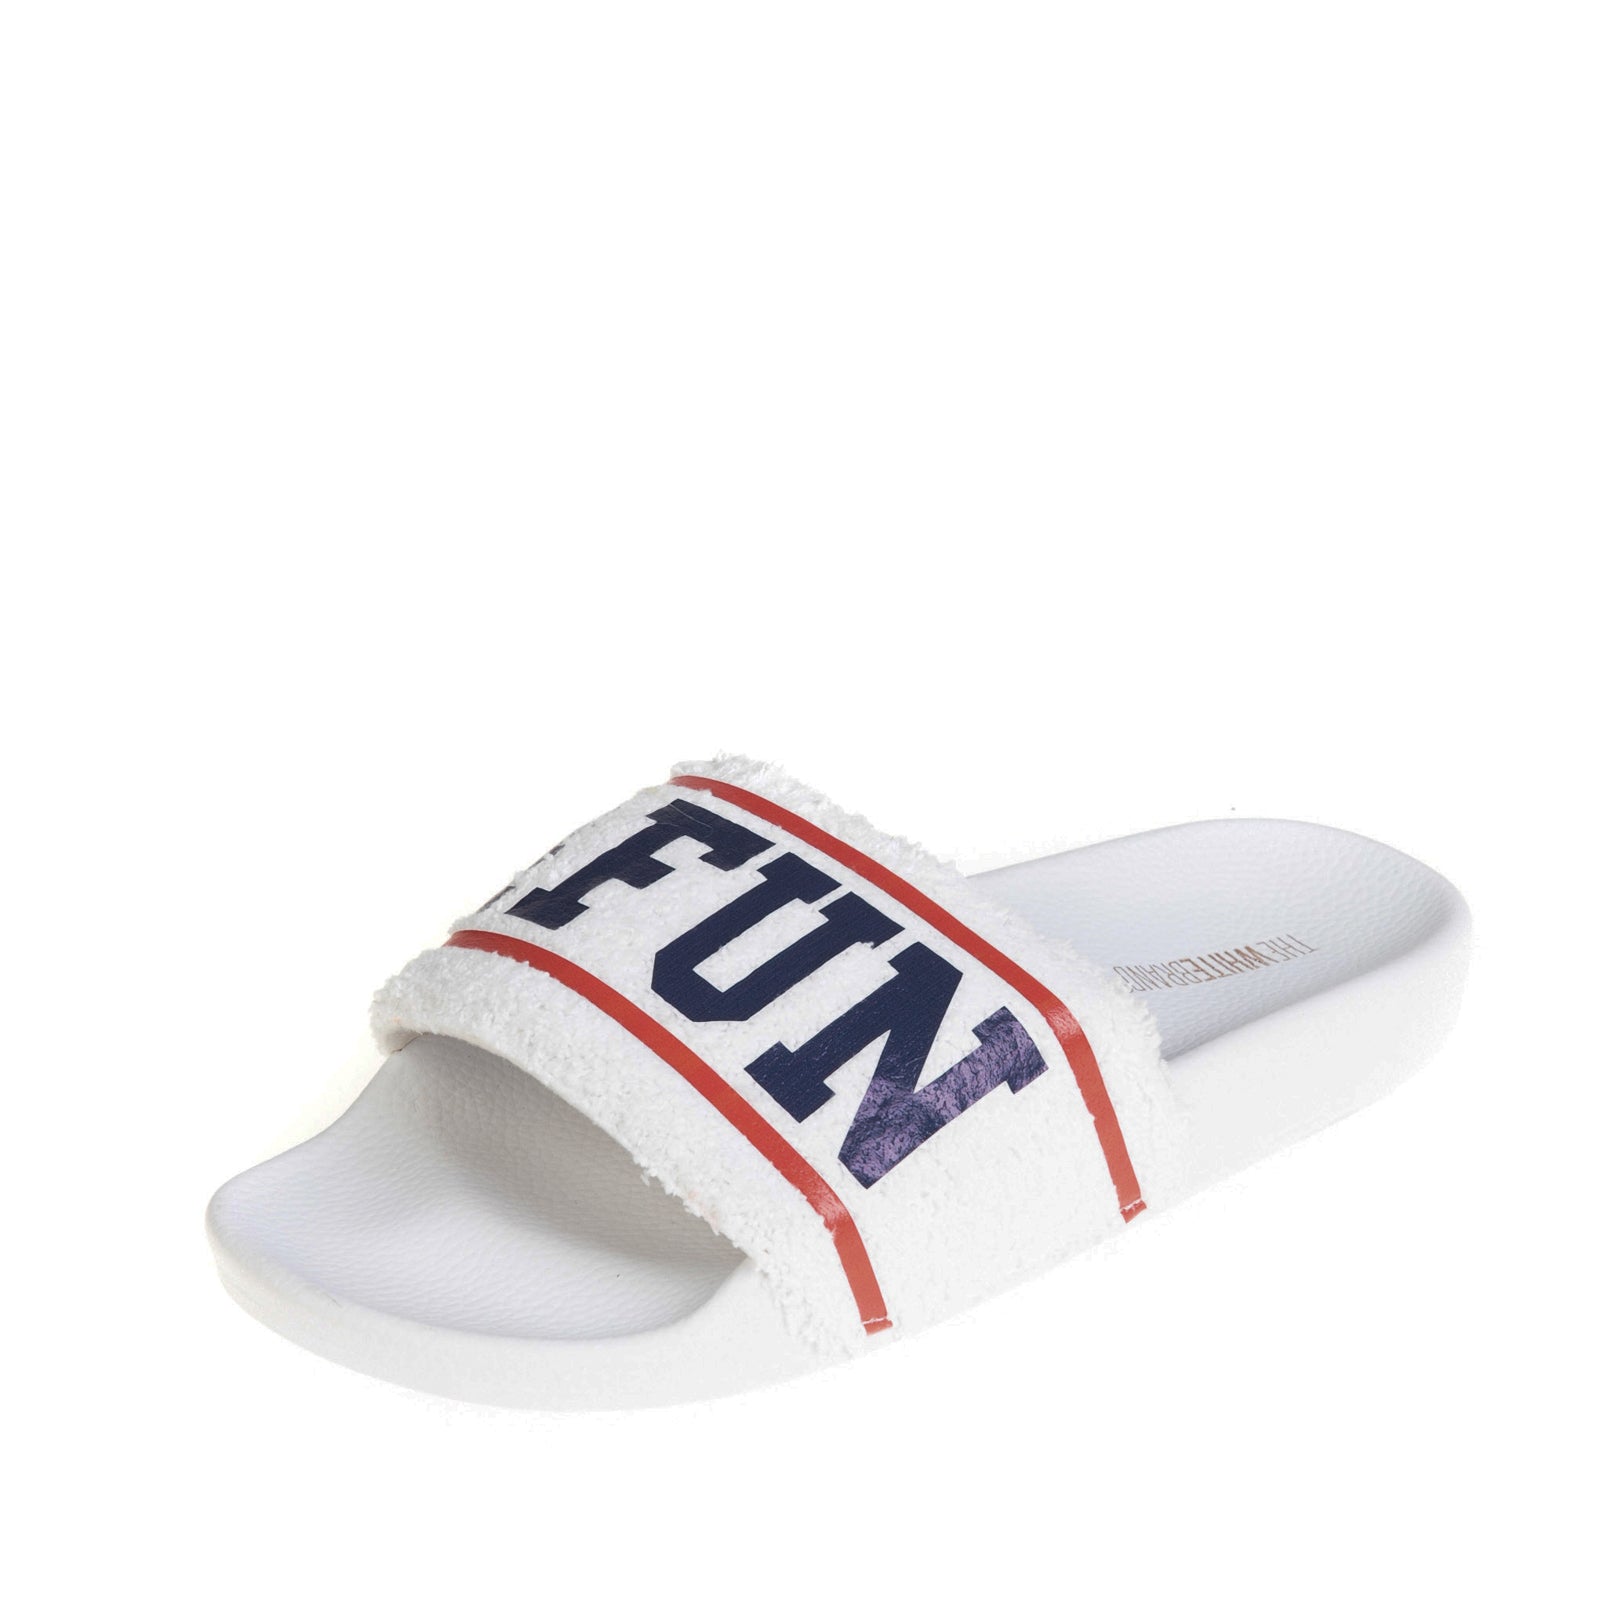 THE WHITE BRAND Terrycloth Slide Sandals Size 36 UK 3 US 6 Coated 'JUST 4 FUN' gallery main photo